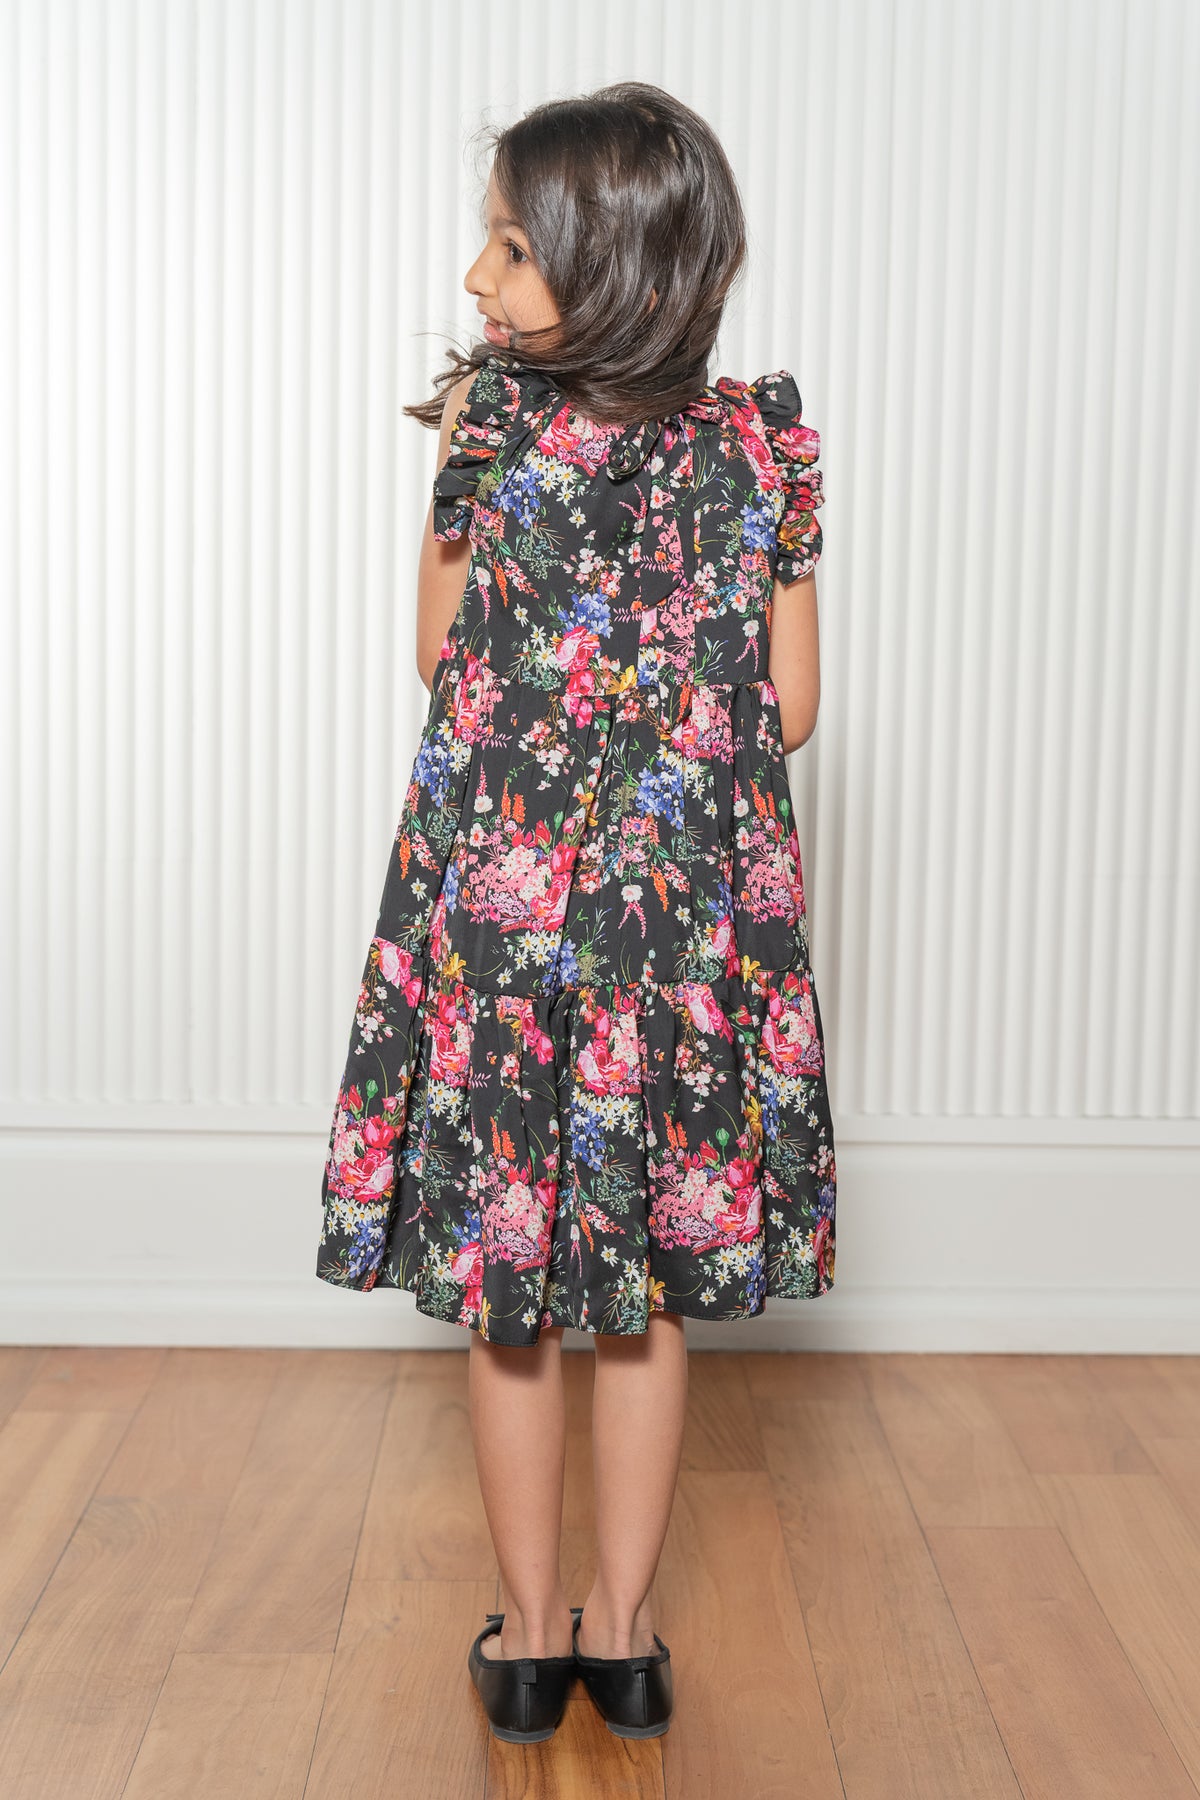 Satya wearing the Paloma Tiered Dress in black with vibrant florals - Back View - Harleen Kaur